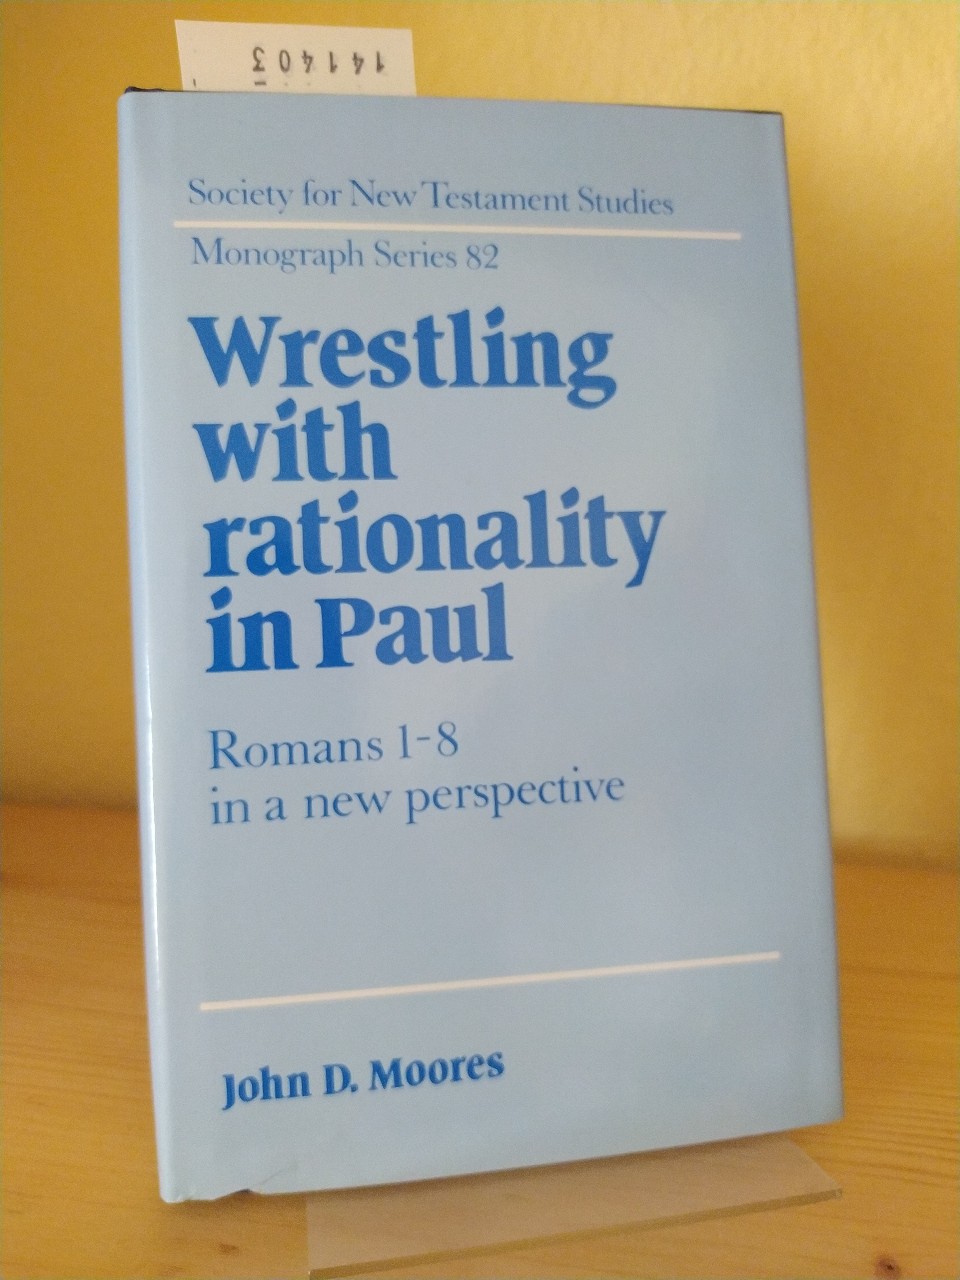 Wrestling with rationality in Paul. Romans 1-8 in a new perspective. [By John D. Moores]. (= Society for New Testament Studies, Monograph Series 82). - Moores, John D.